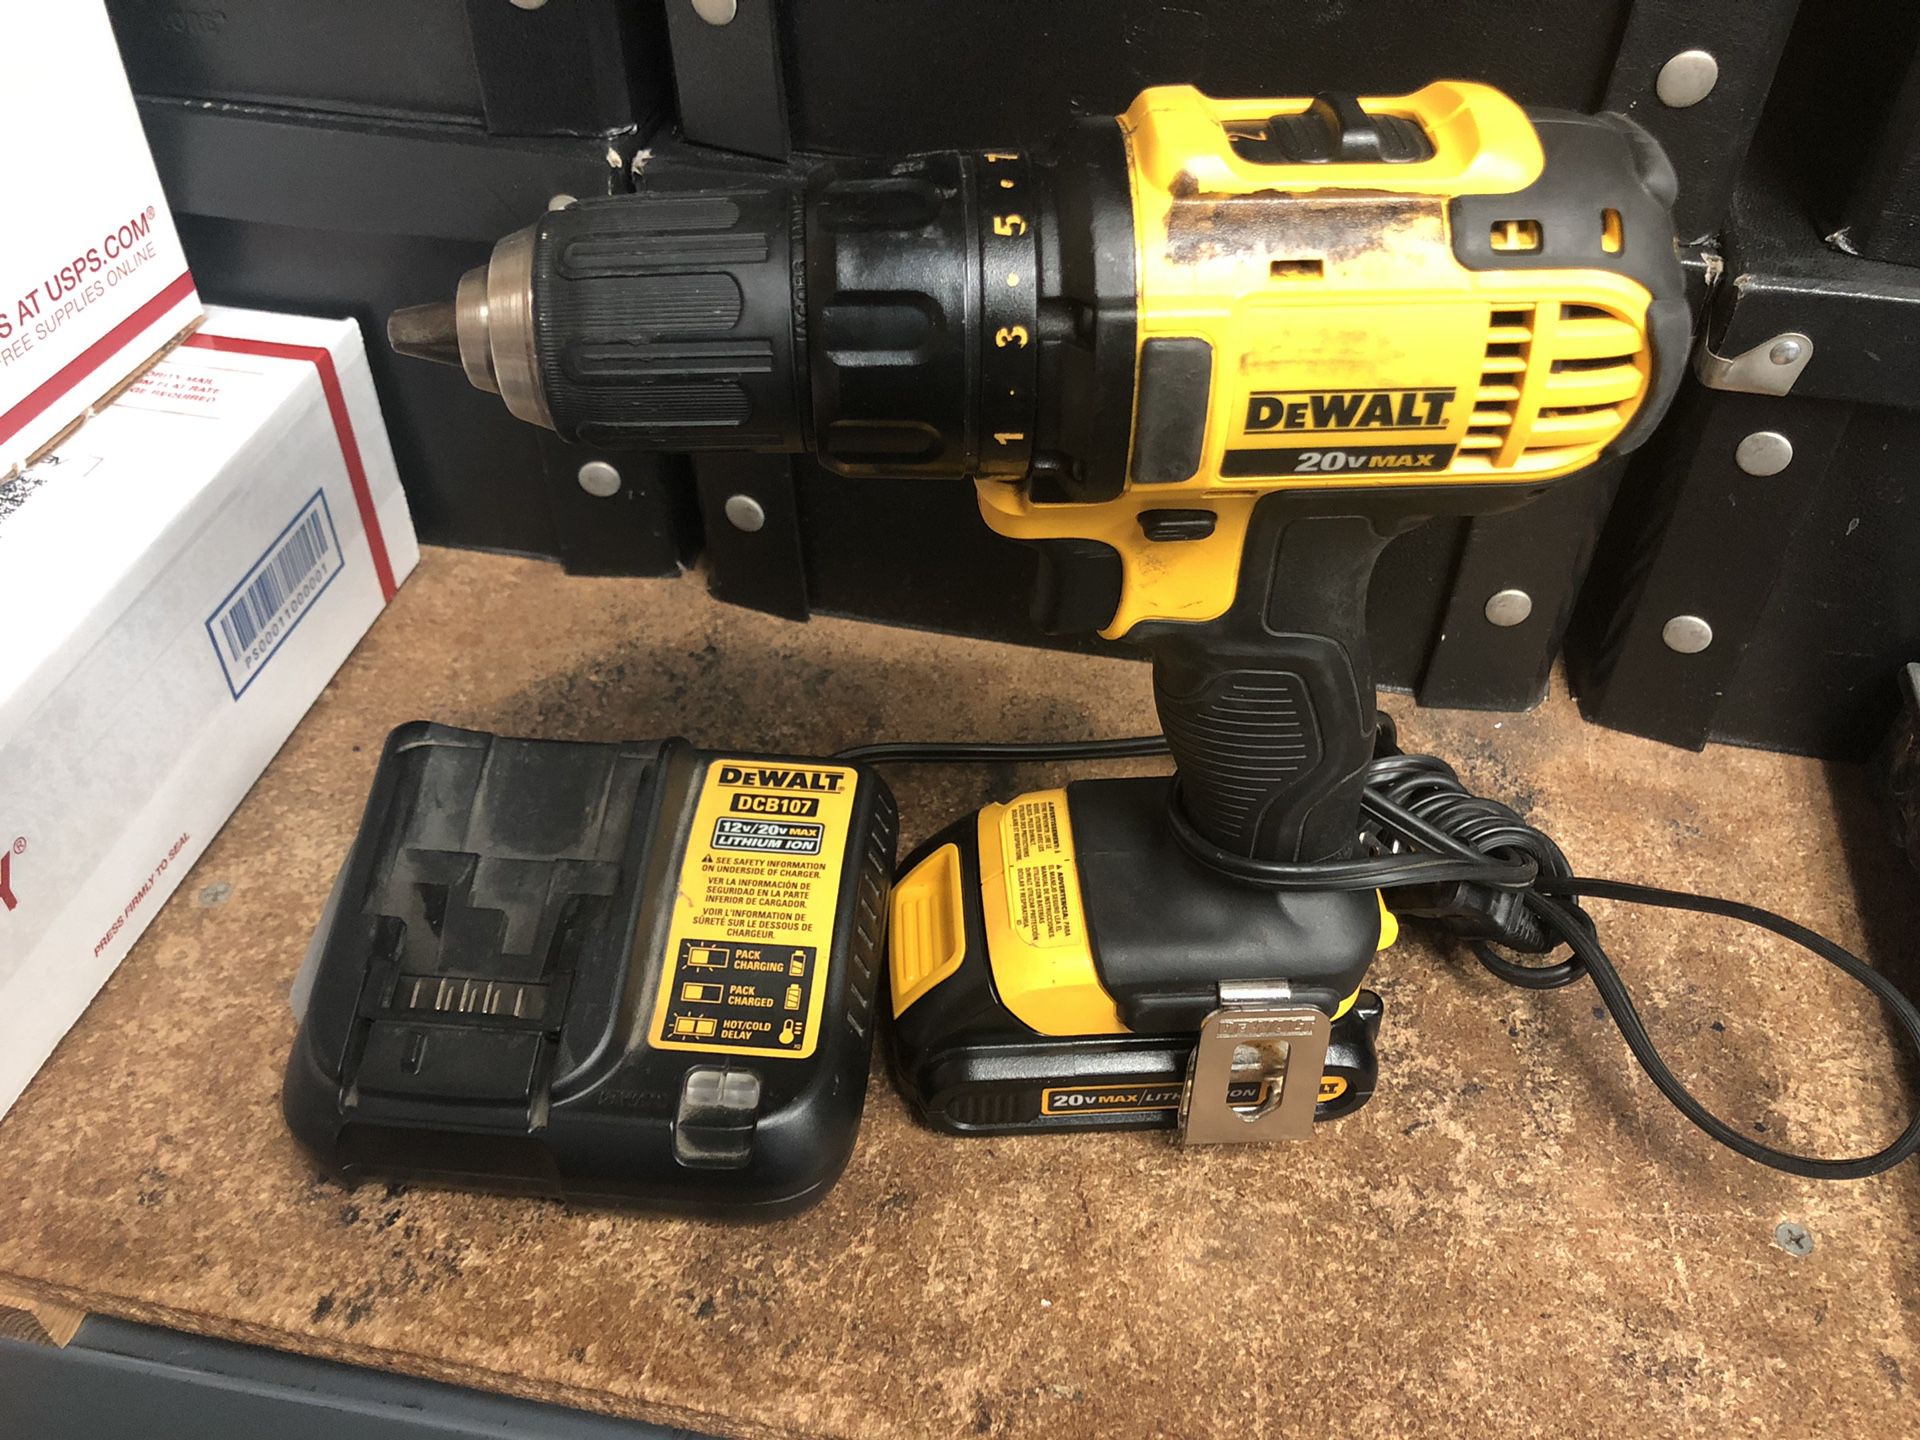 Drill, Tools-Power Dewalt 20V Drill W/Charger & Battery ... Negotiable